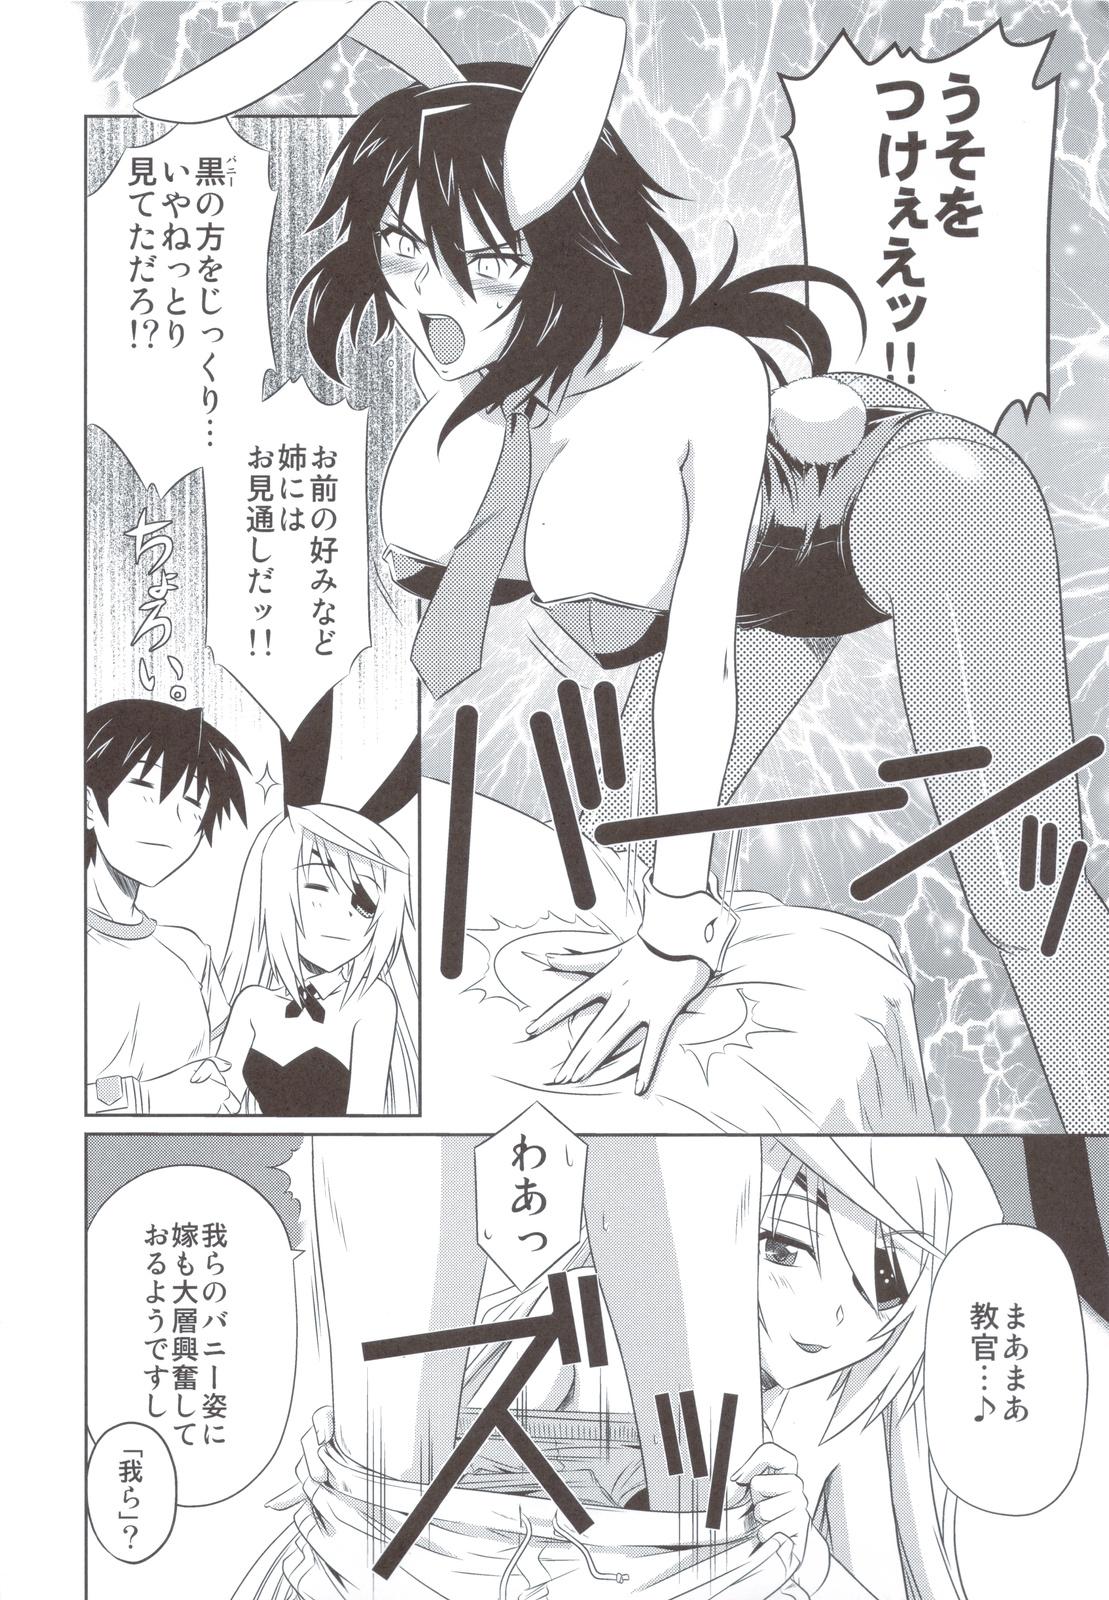 Hiddencam is Incest Strategy 3 - Infinite stratos Anal - Page 5